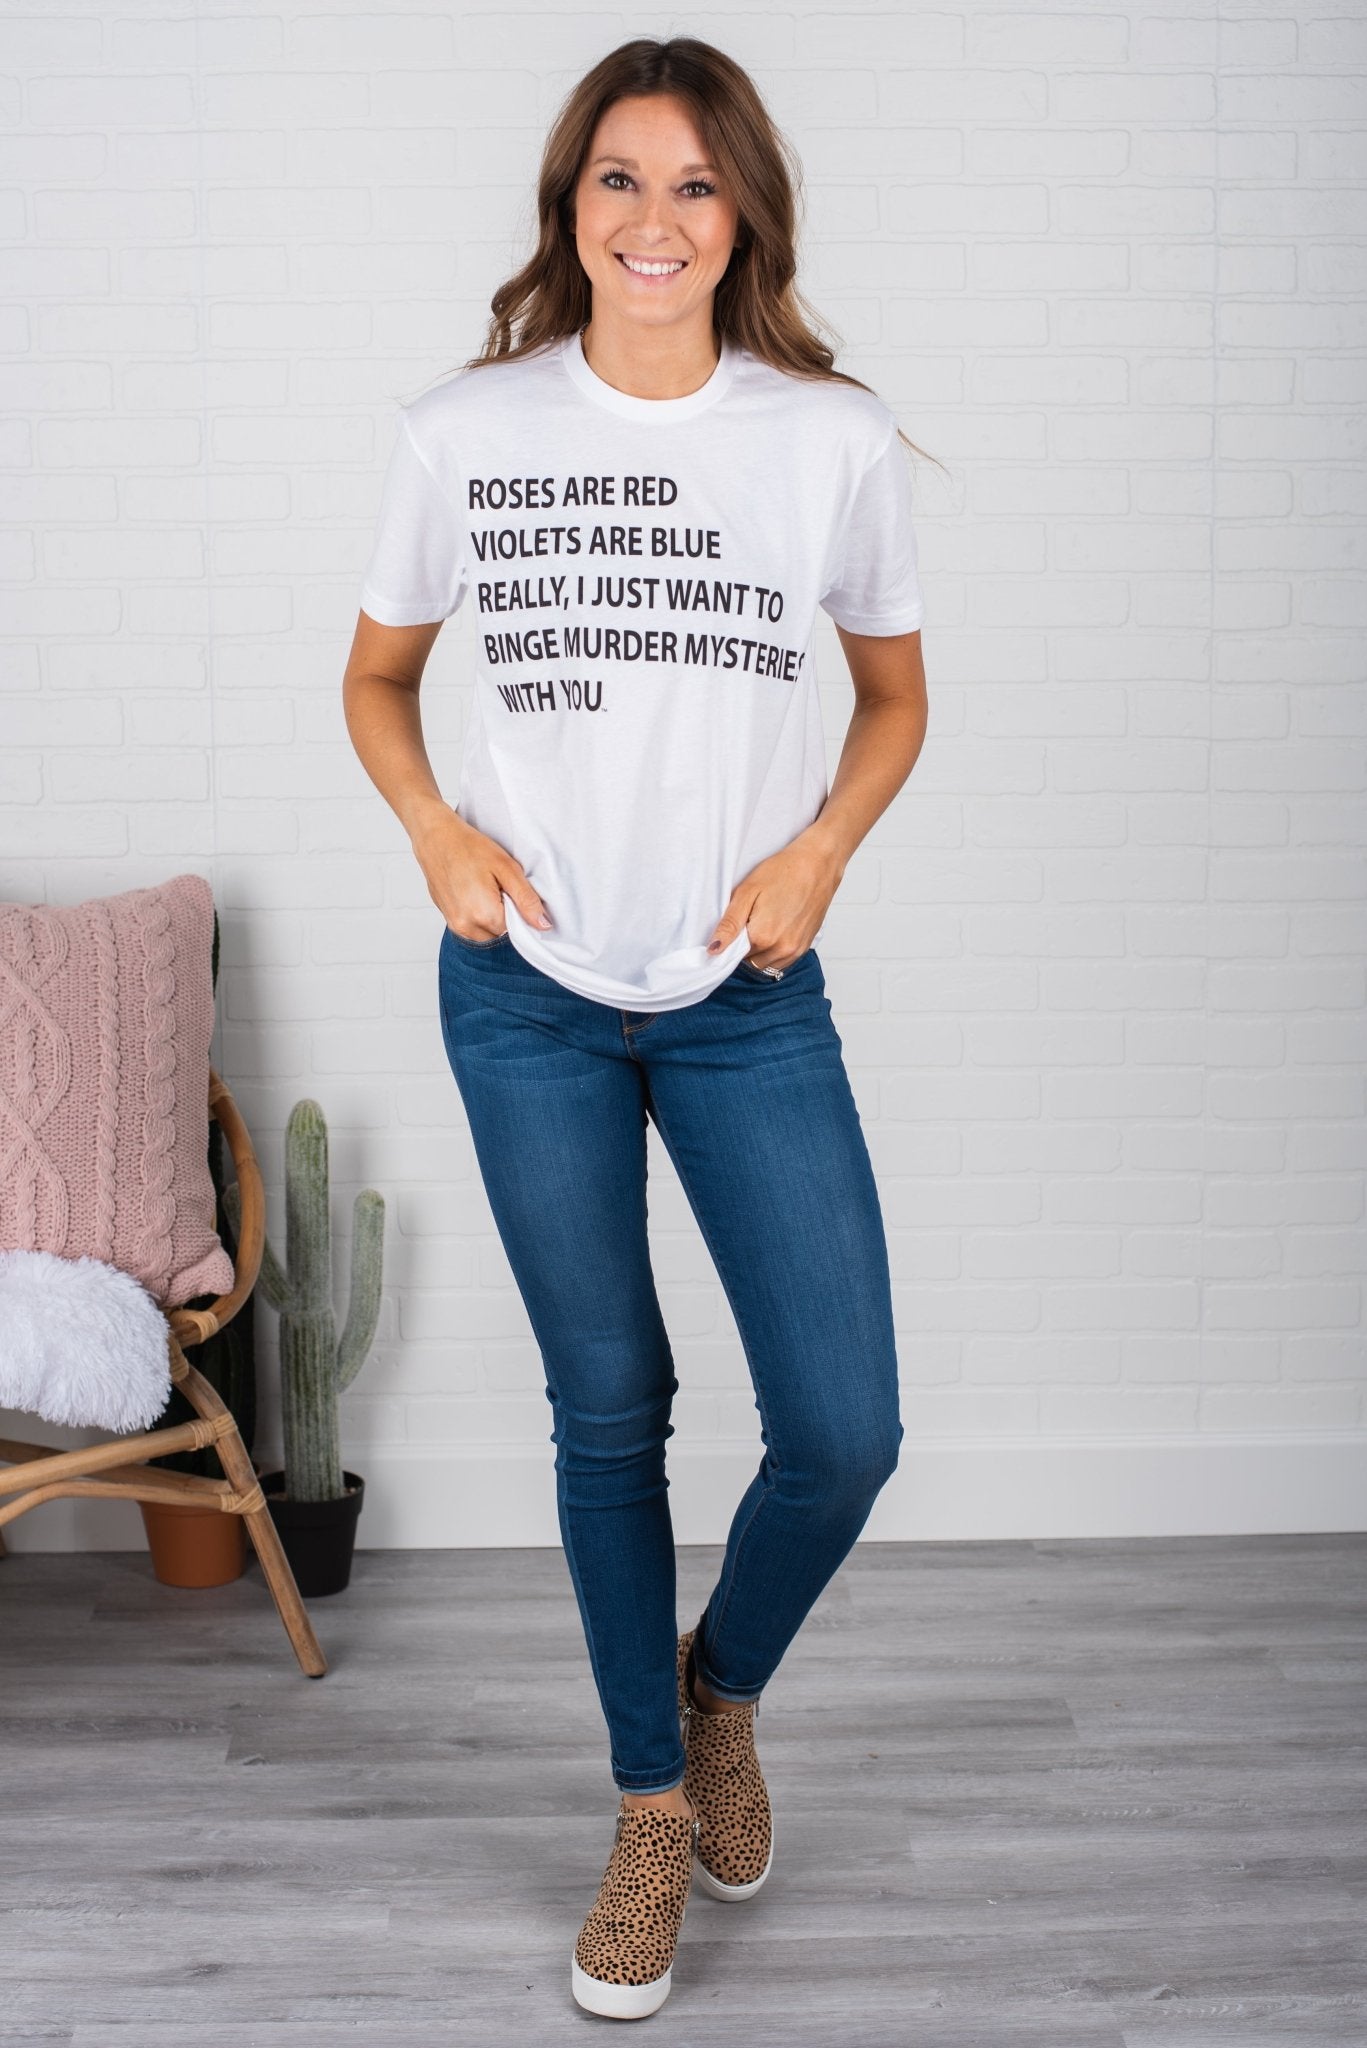 Murder mystery unisex short sleeve t-shirt white - Trendy T-shirts - Cute Graphic Tee Fashion at Lush Fashion Lounge Boutique in Oklahoma